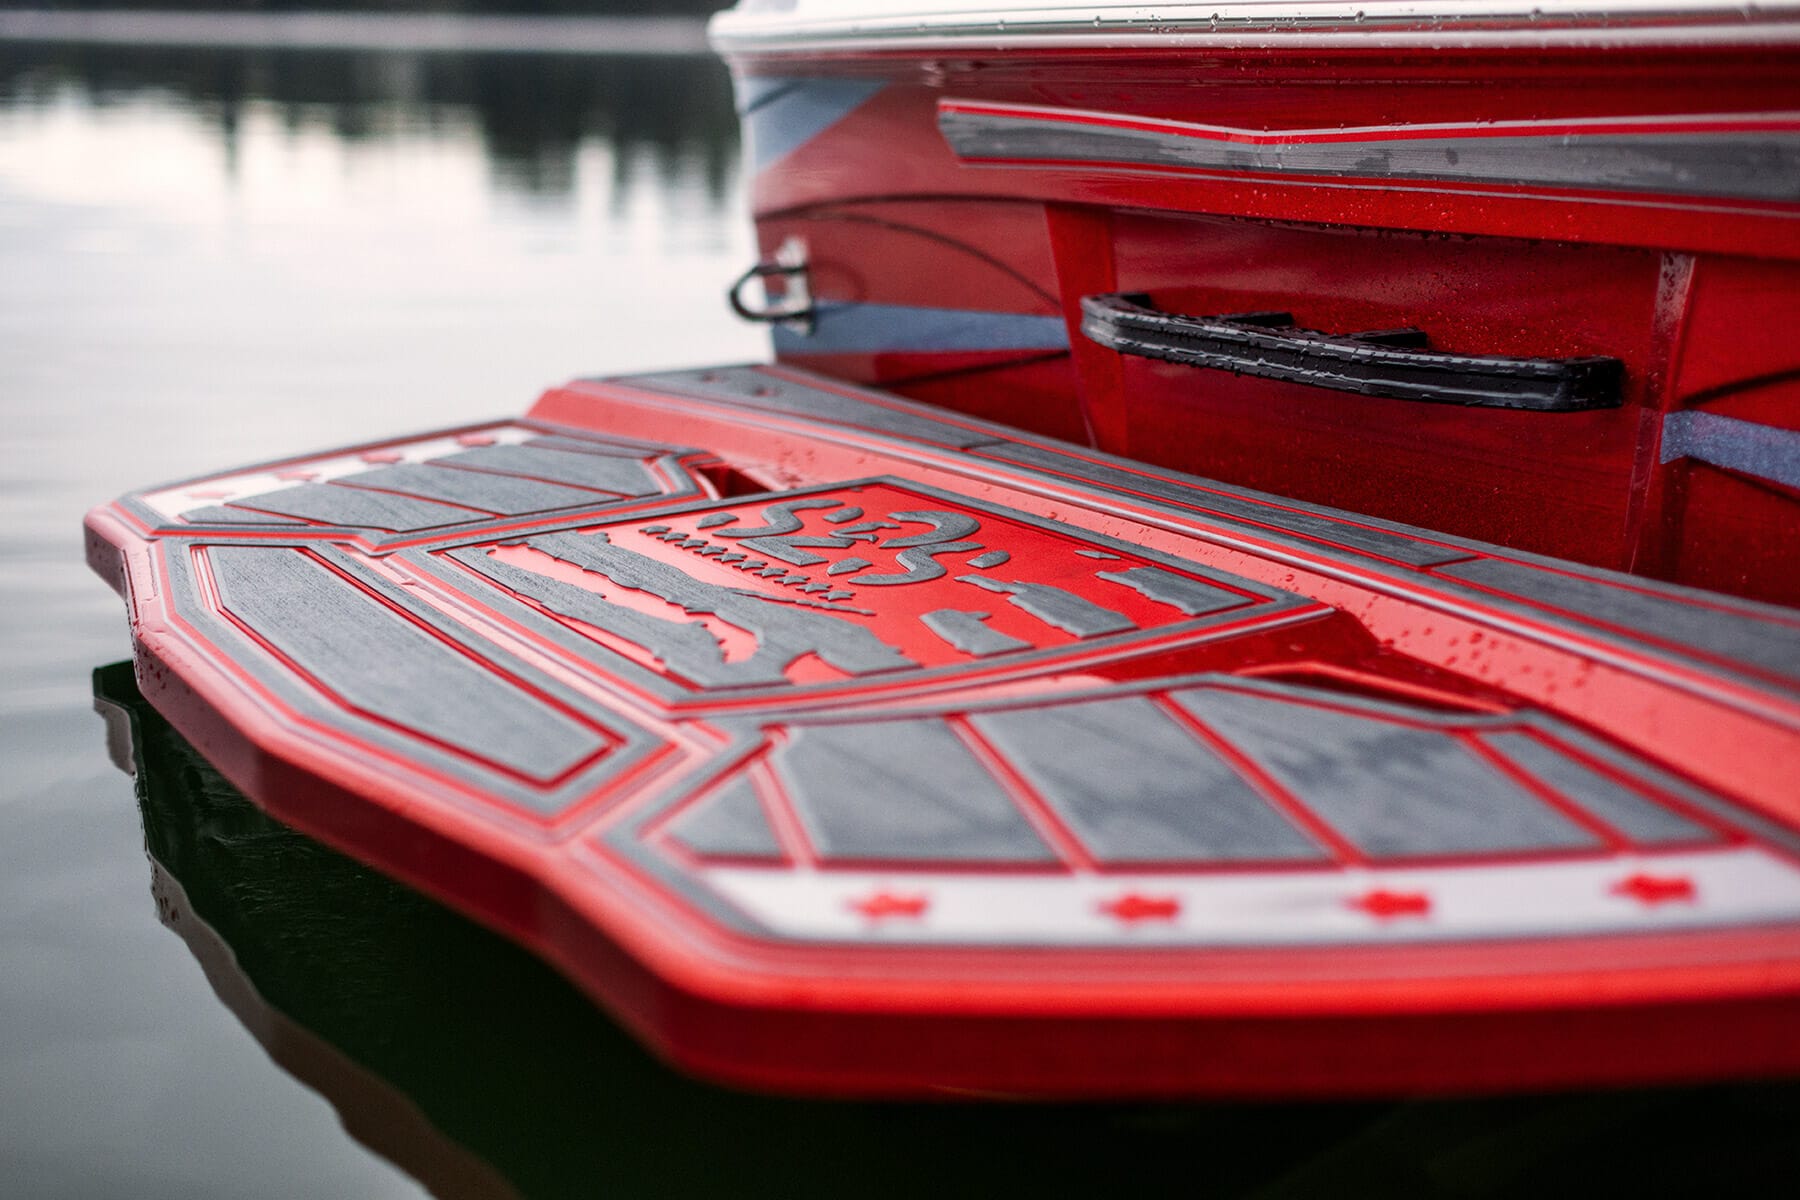 A red wakesurf boat with a red seat on it.